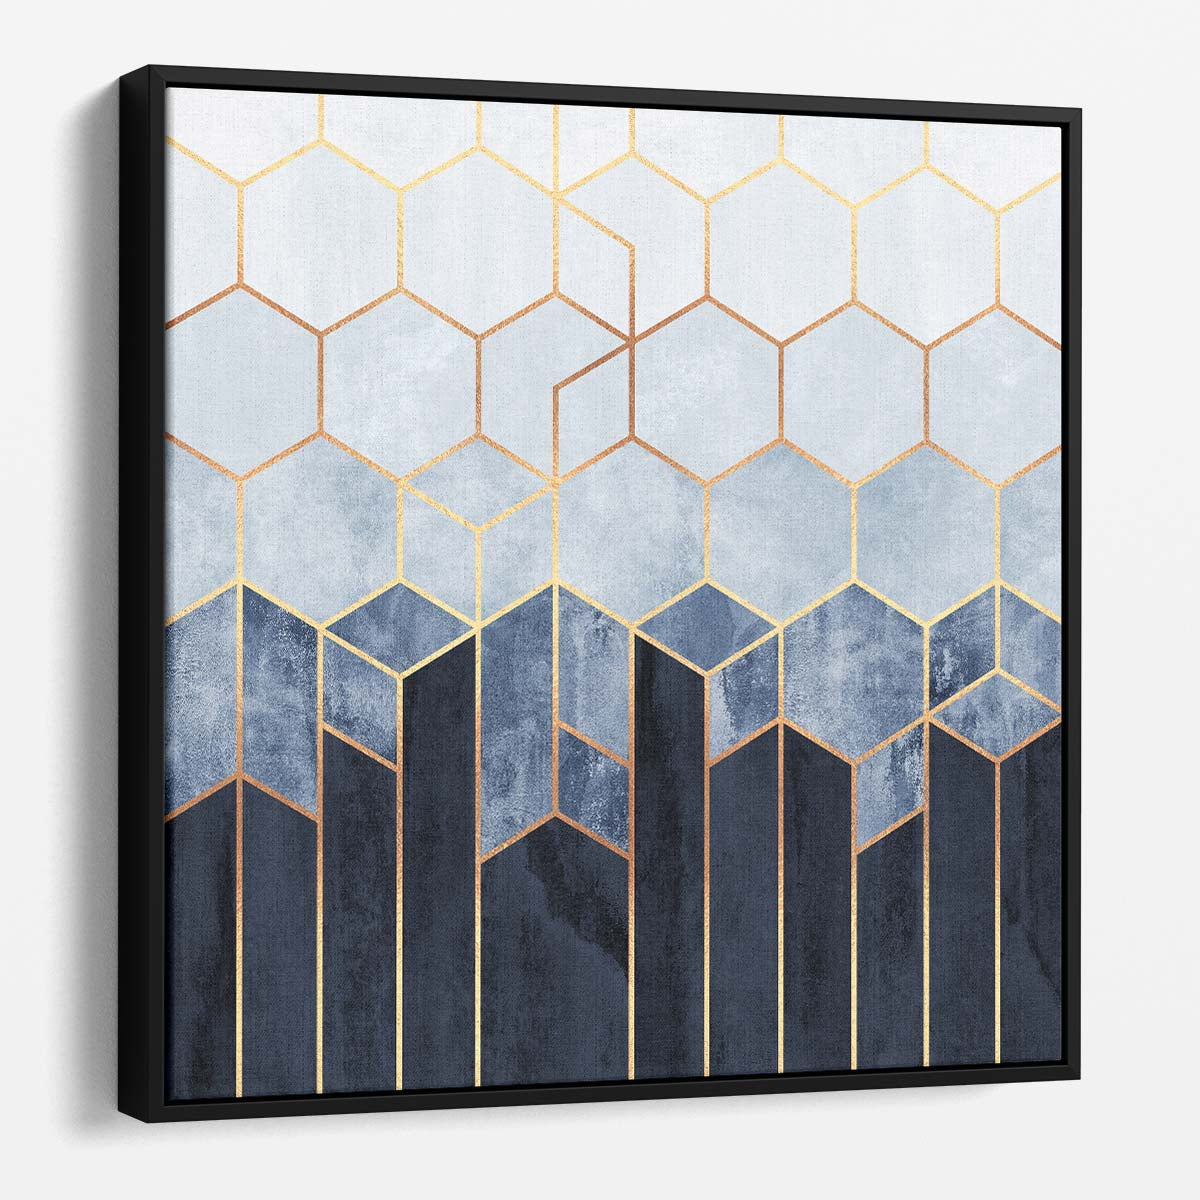 Blue and Gold Geometric Hexagon Abstract Wall Art Print by Luxuriance Designs. Made in USA.